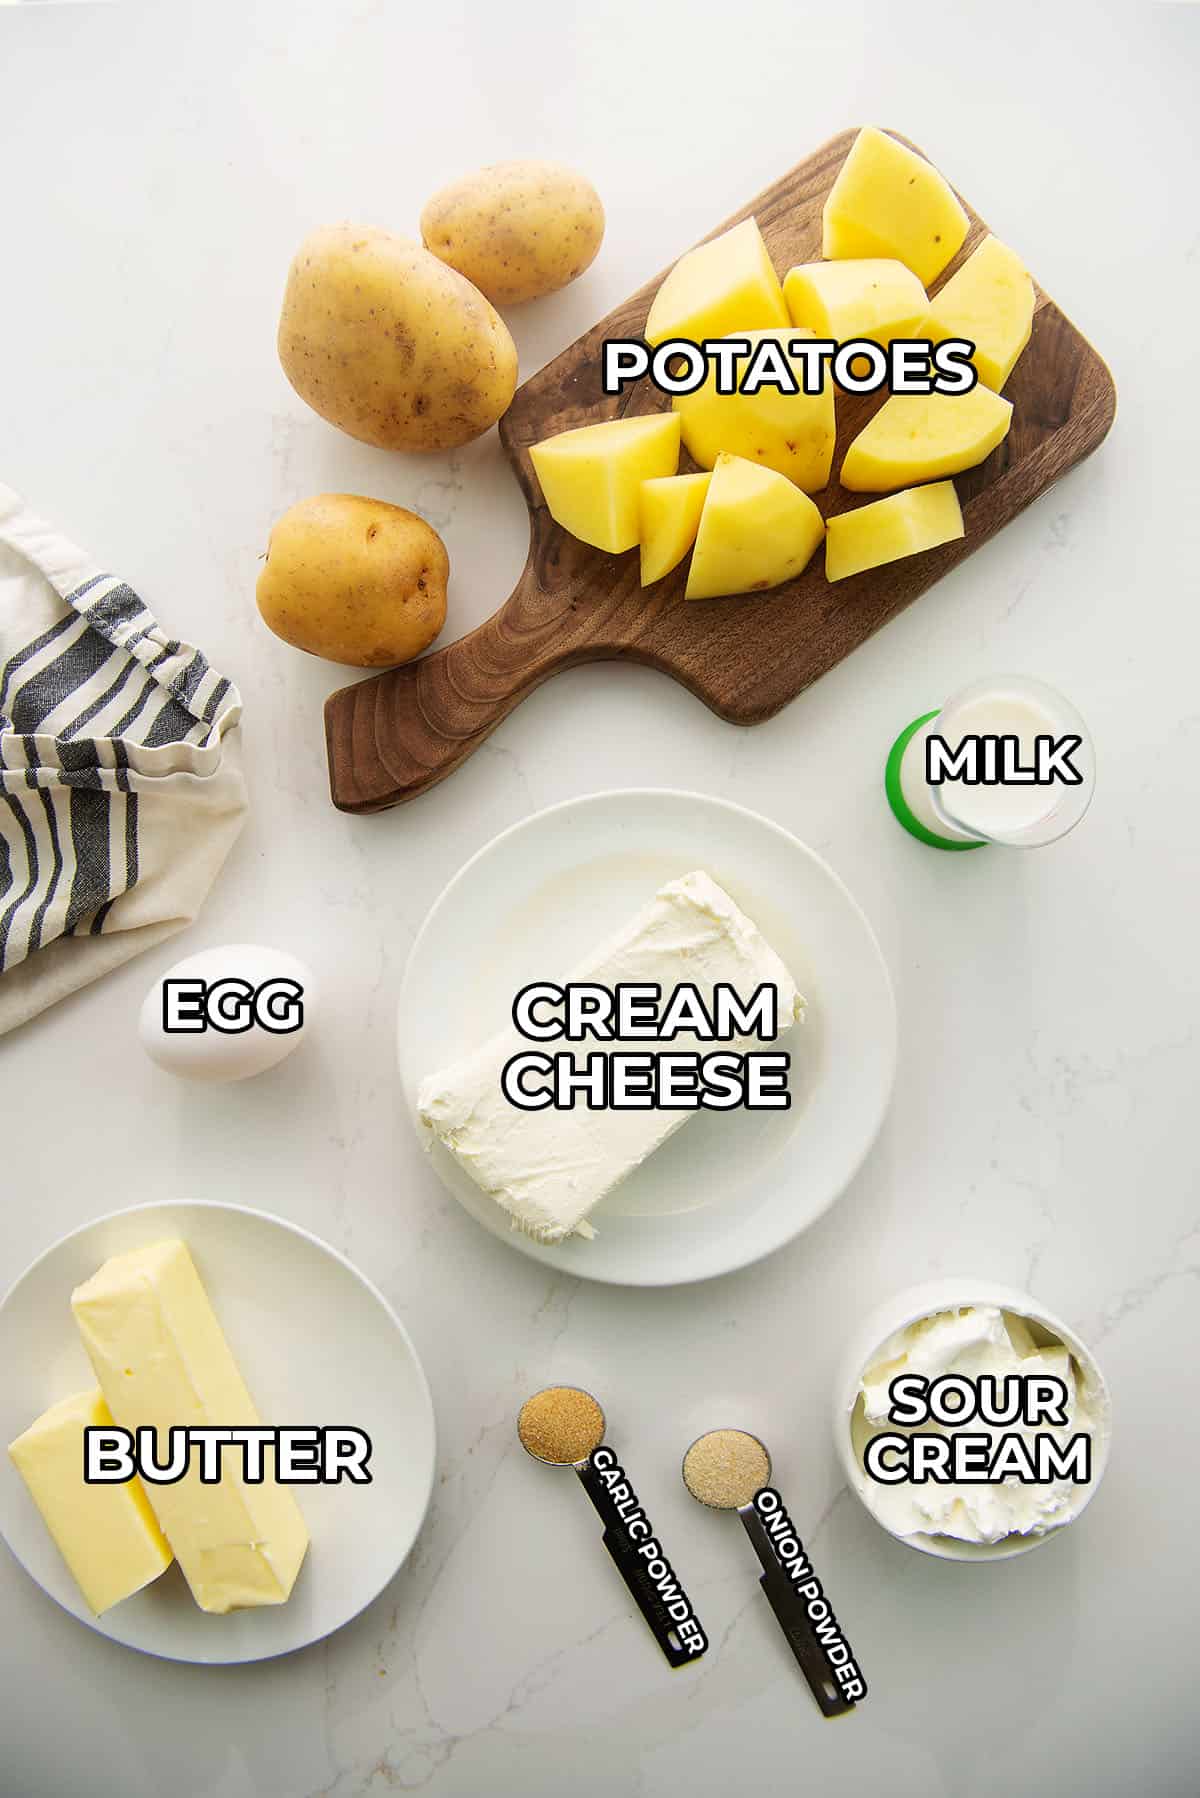 ingredients for baked mashed potatoes.